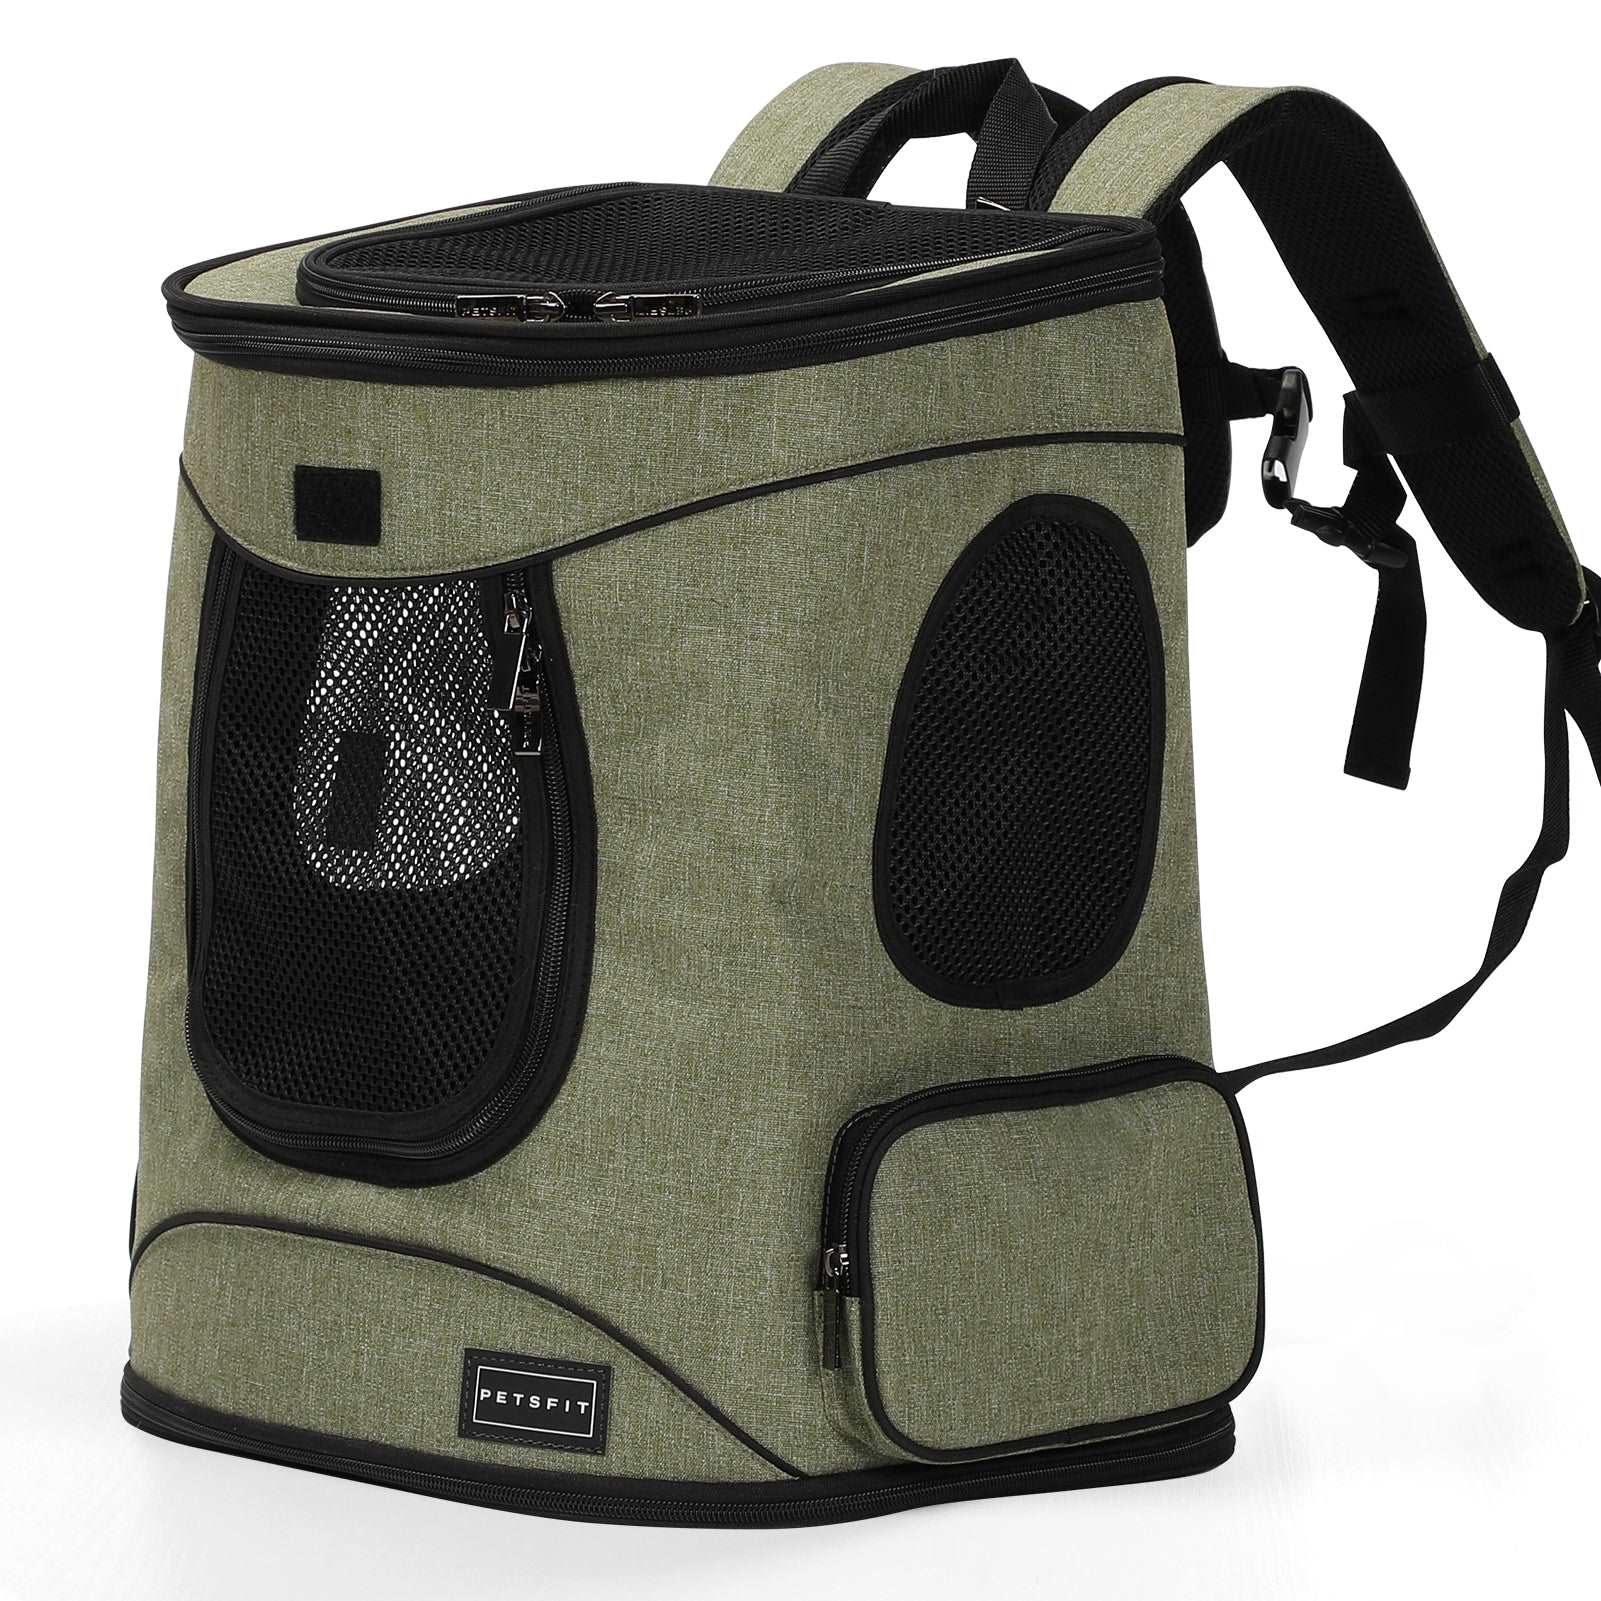 Petsfit-Soft-Pet-Backpack-Carrier-for-Hiking-10